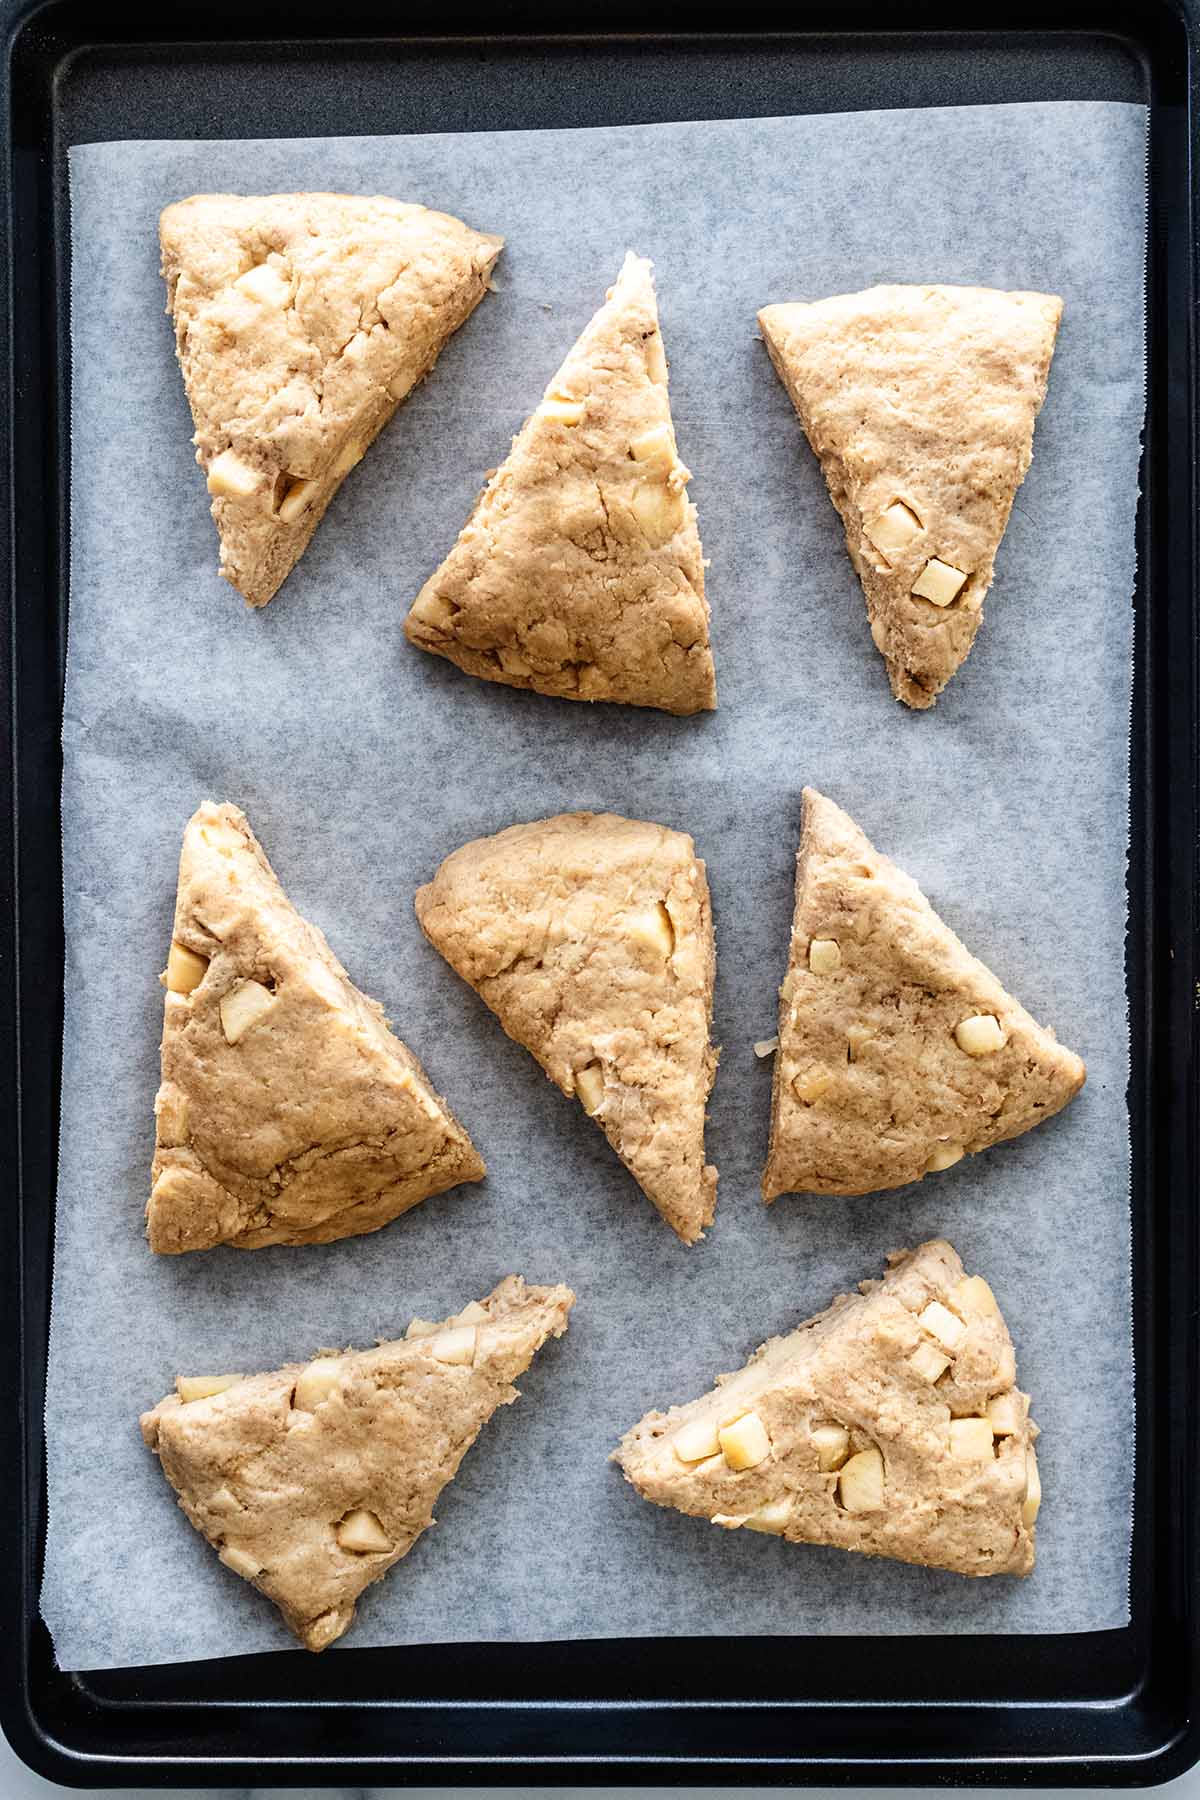 Top view of unbaked apple scones on parchment paper and baking pan